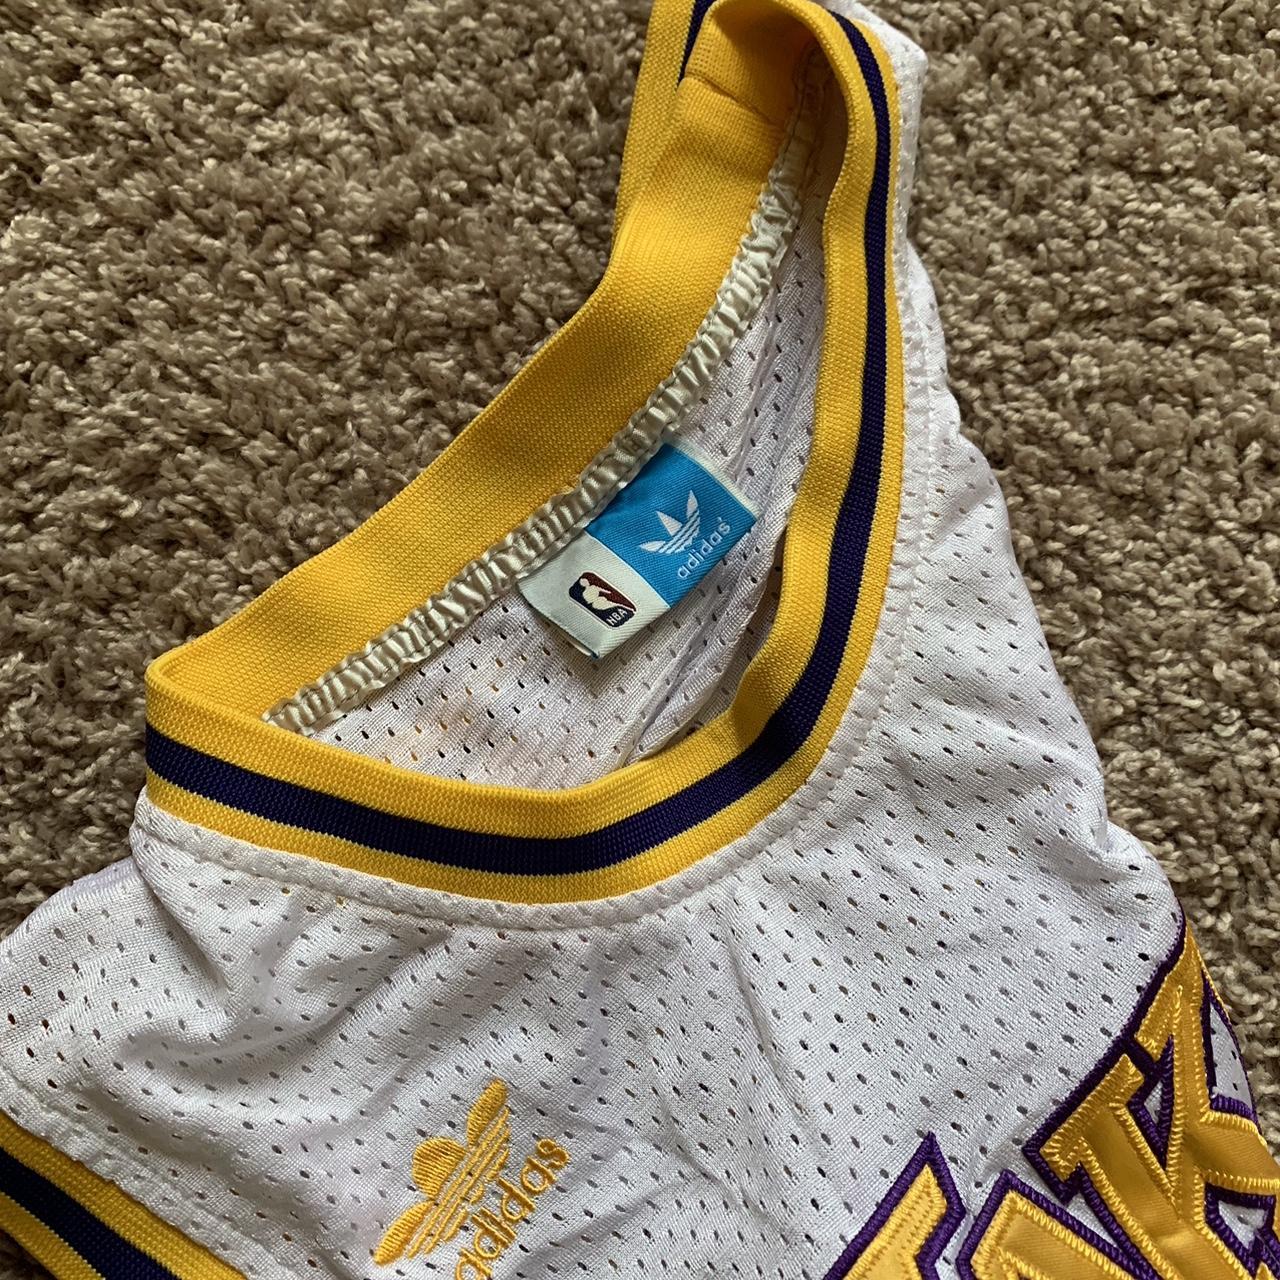 2015/16 nba lakers away jersey. Classic gold and - Depop